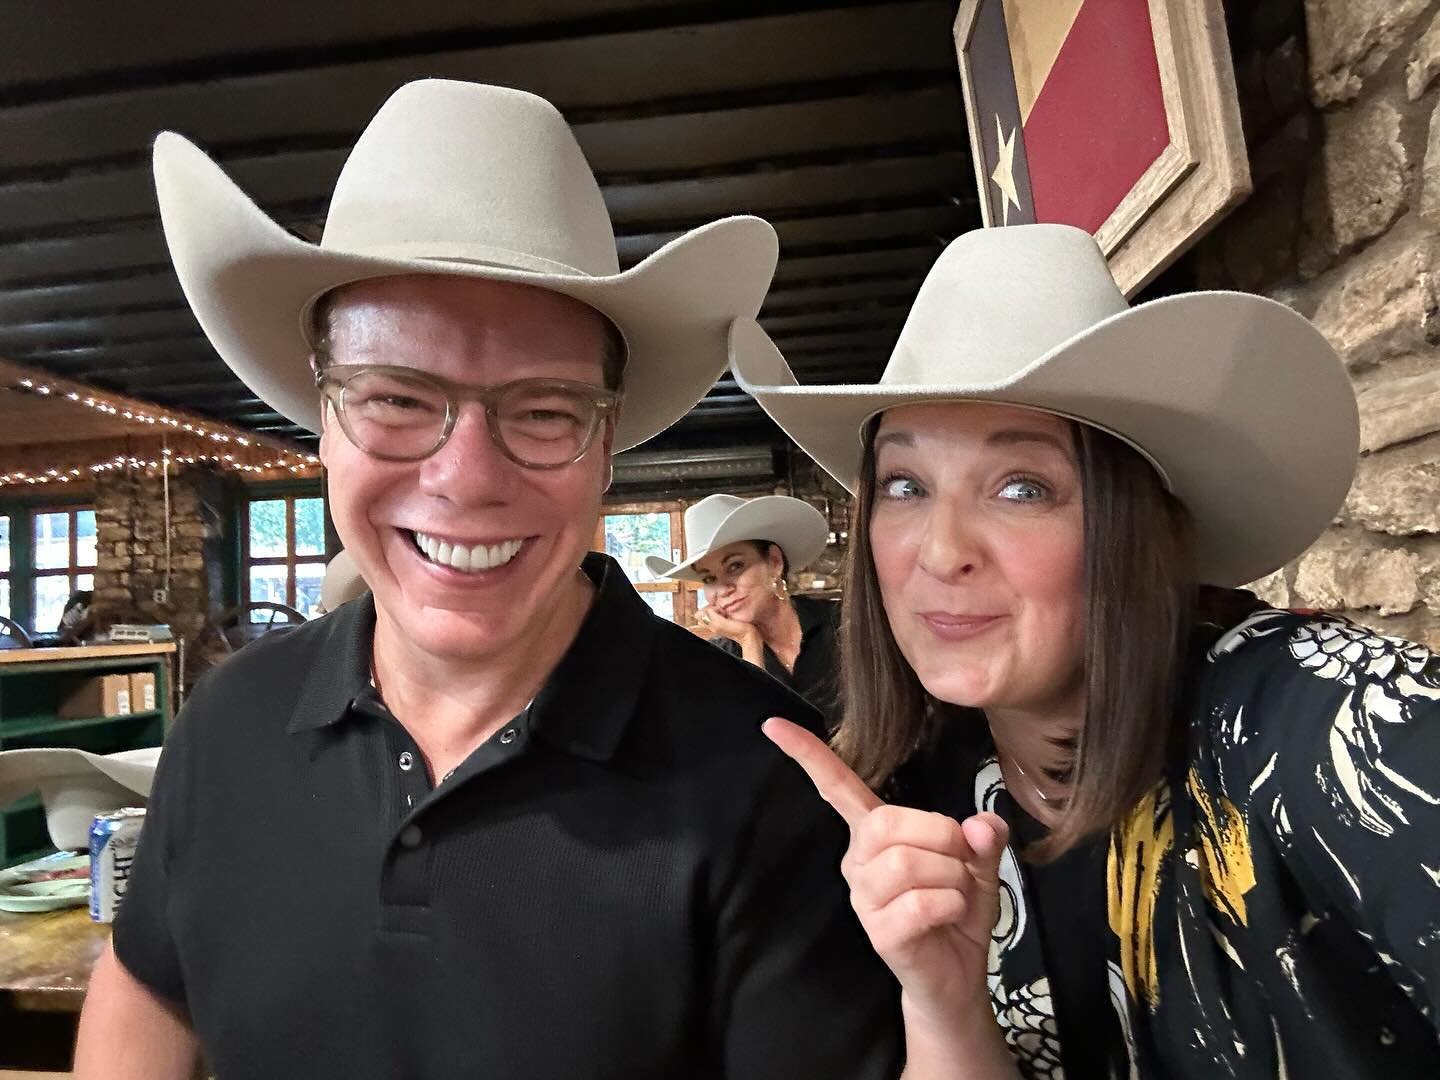 When in Texas...
As a born-and-raised Texas girl, I've never looked more Texan than I did in this moment. What a time celebrating friends last weekend.

Thanks @macrichardatx &amp; @juliesrichard for letting us join in on the party. Thanks @lisahughe